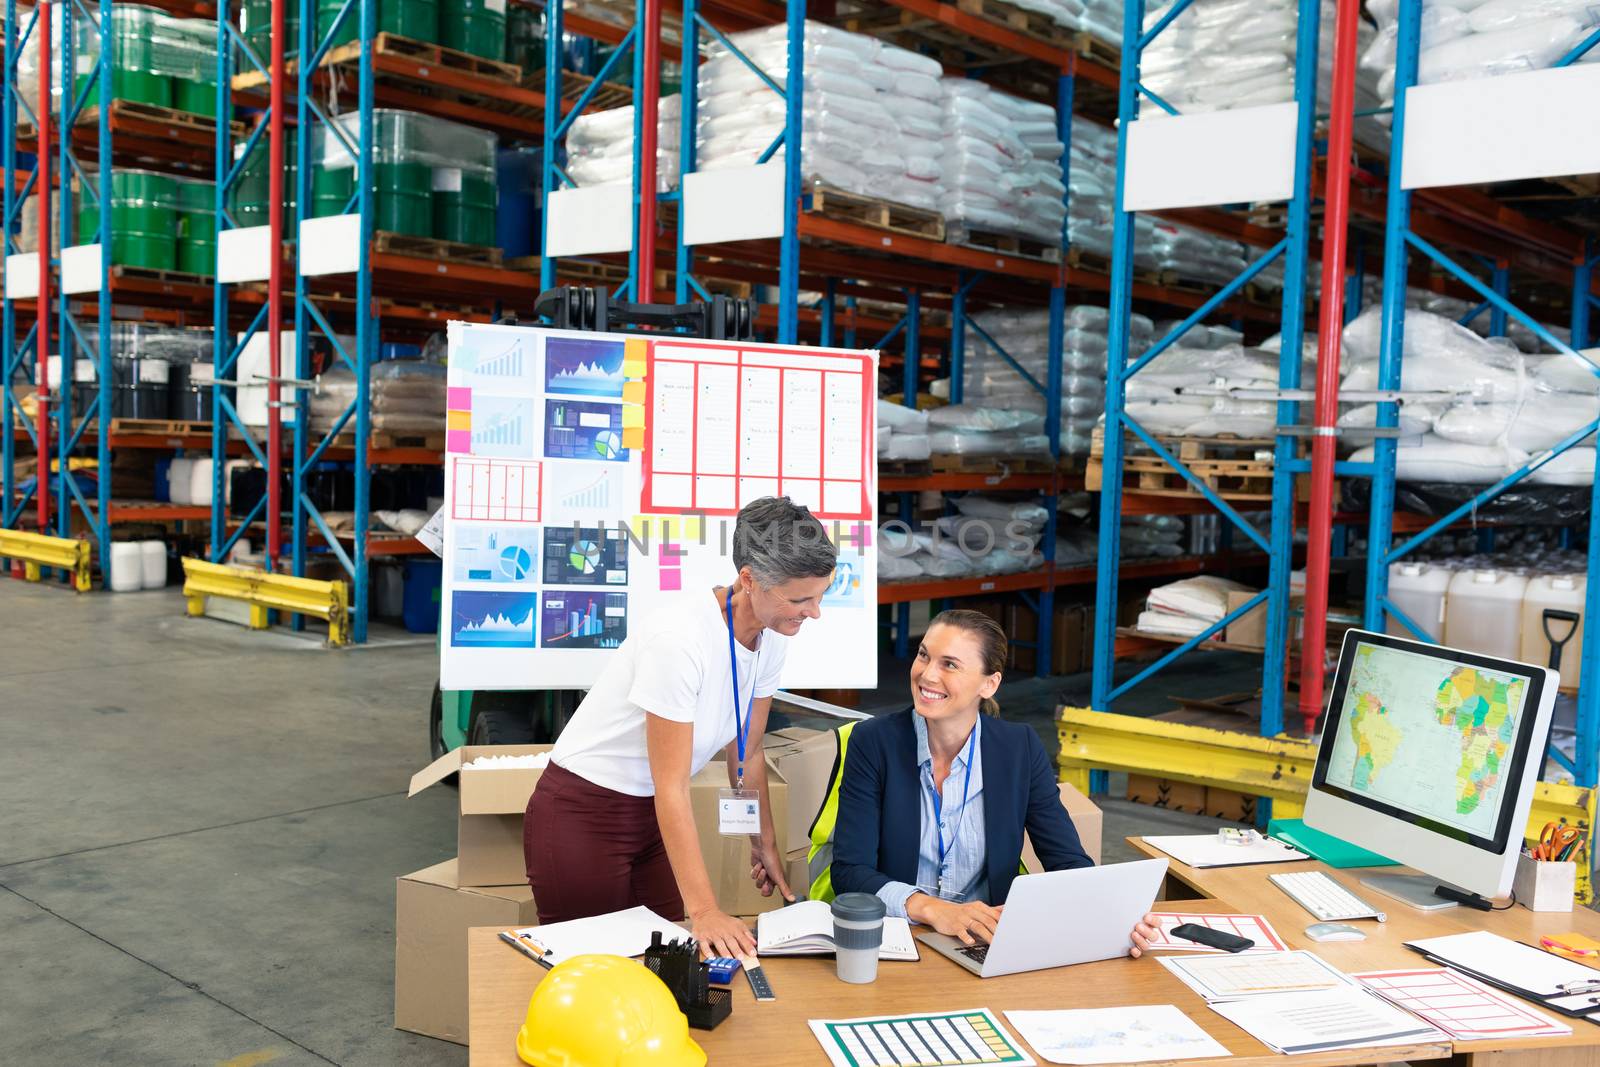 Front view of beautiful Caucasian female manager with her coworker discussing over laptop at desk in warehouse. This is a freight transportation and distribution warehouse. Industrial and industrial workers concept